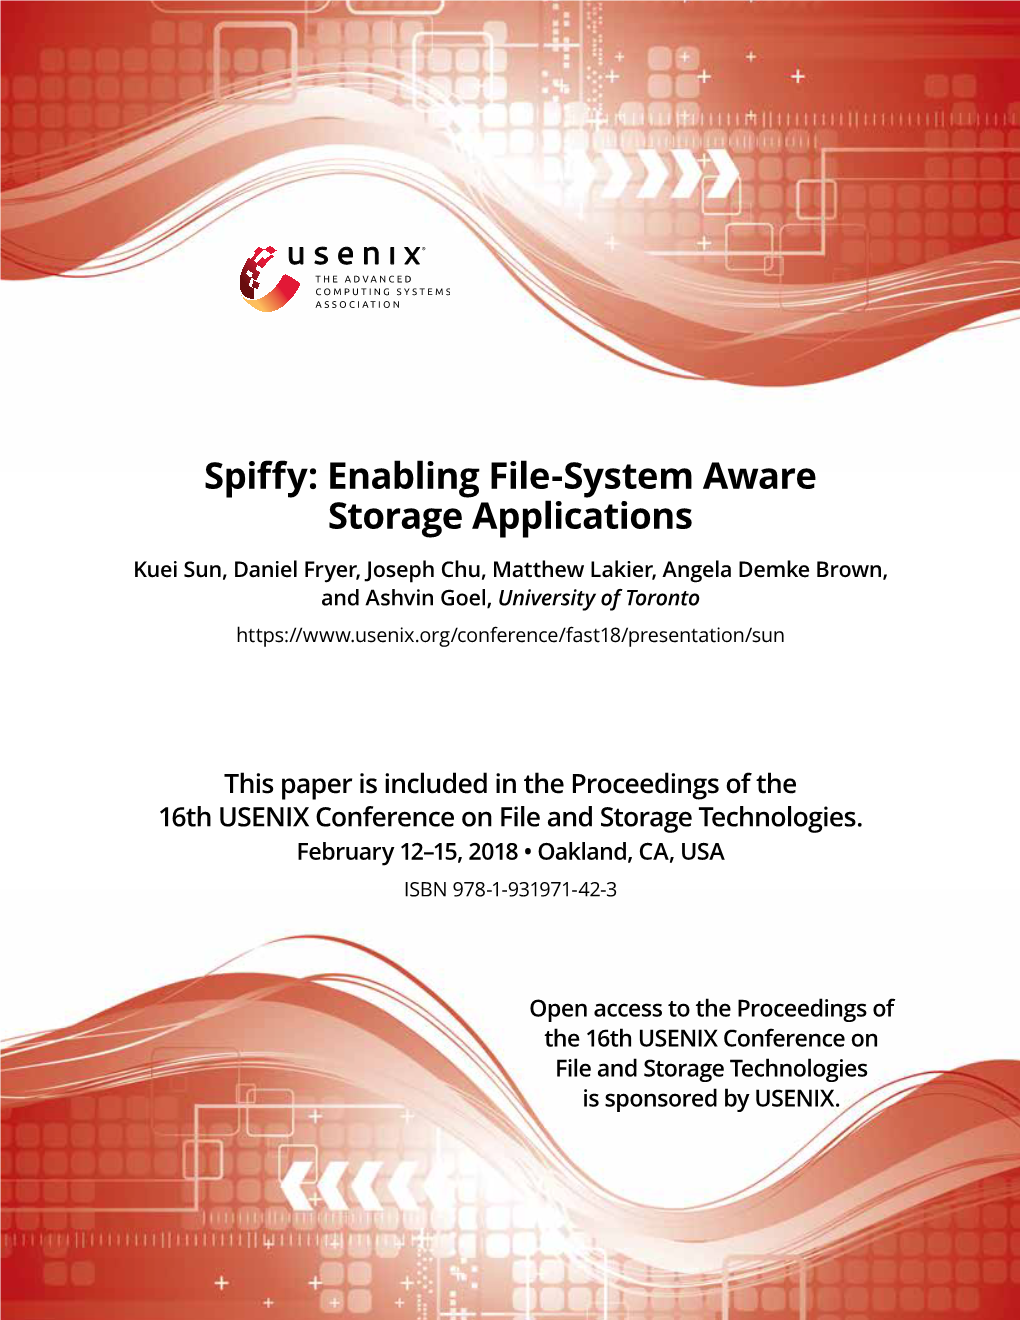 Spiffy: Enabling File-System Aware Storage Applications